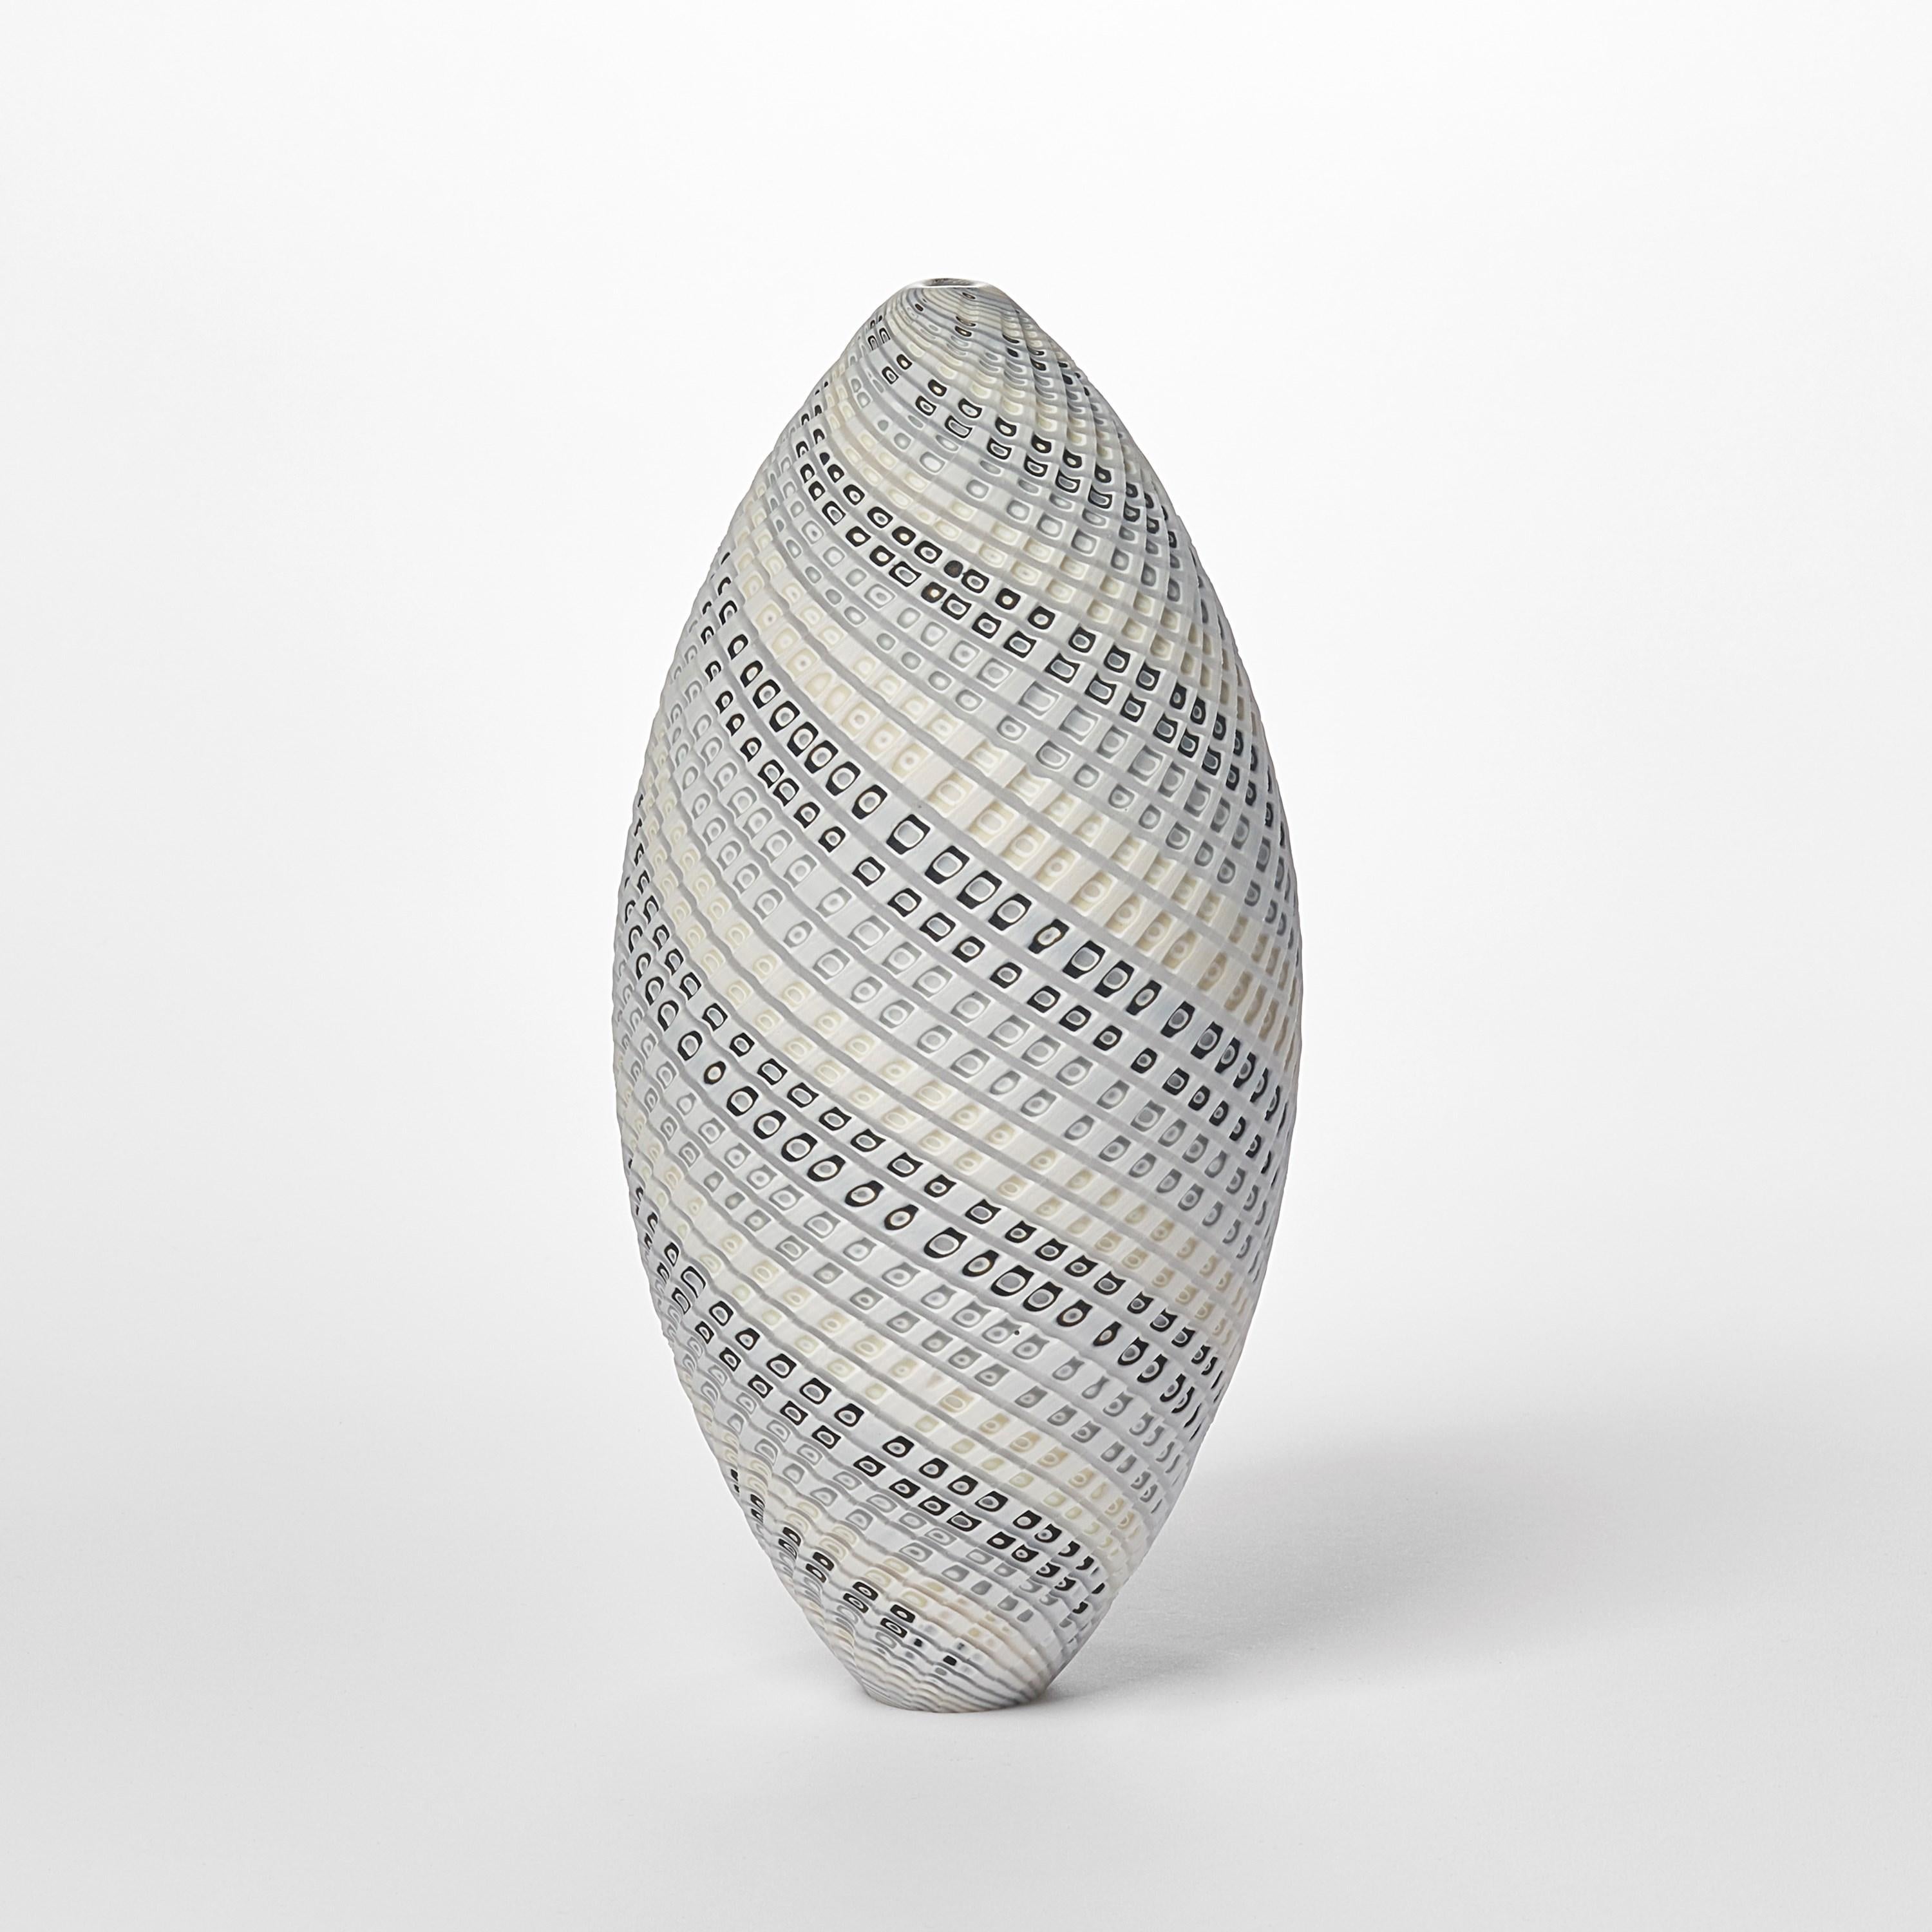 'Woven Two Tone Ovoid (med)' is a unique handblown, sculpted and cut glass sculpture by the British artist, Layne Rowe.

Rowe’s inspiration is drawn from the dramatic Devon coastline which informs his love for detail, a constant theme for his